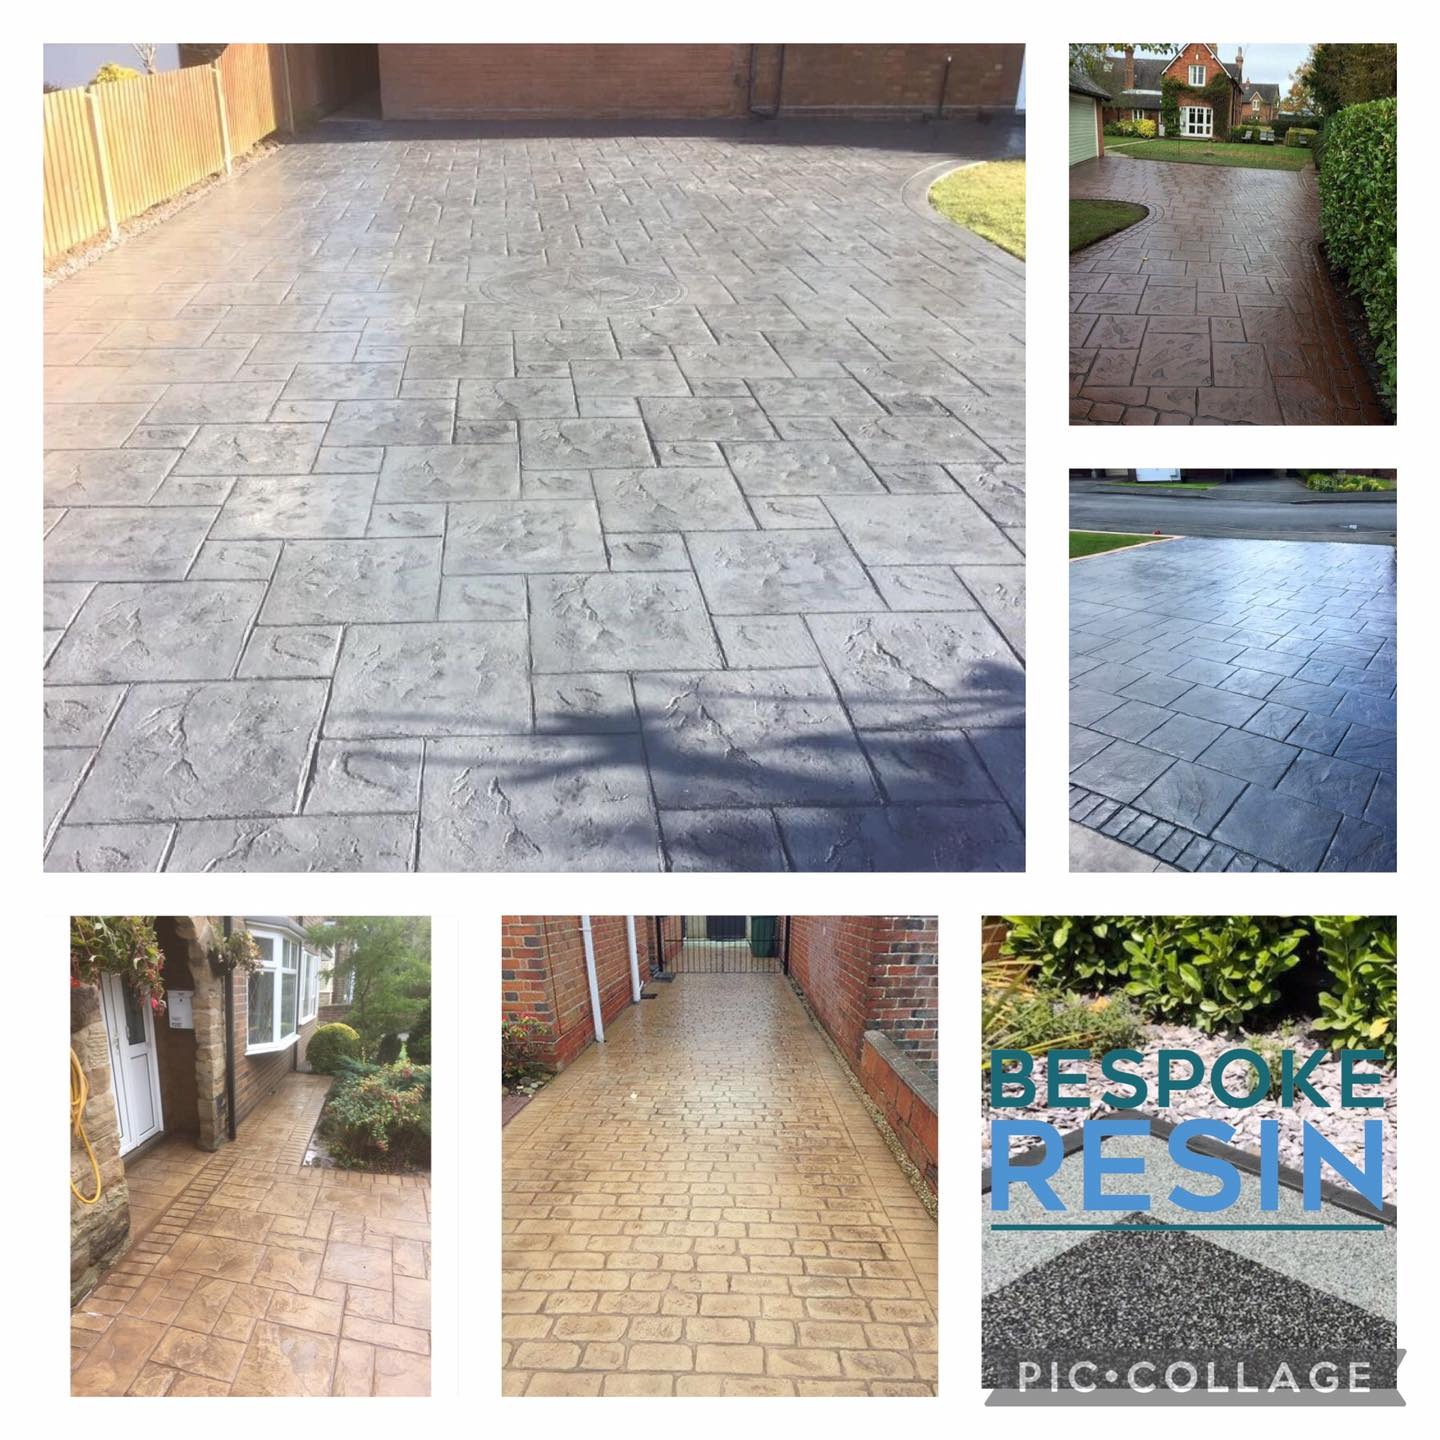 Concrete Print Driveways In Doncaster, Sheffield, Barnsley And Rotherham.